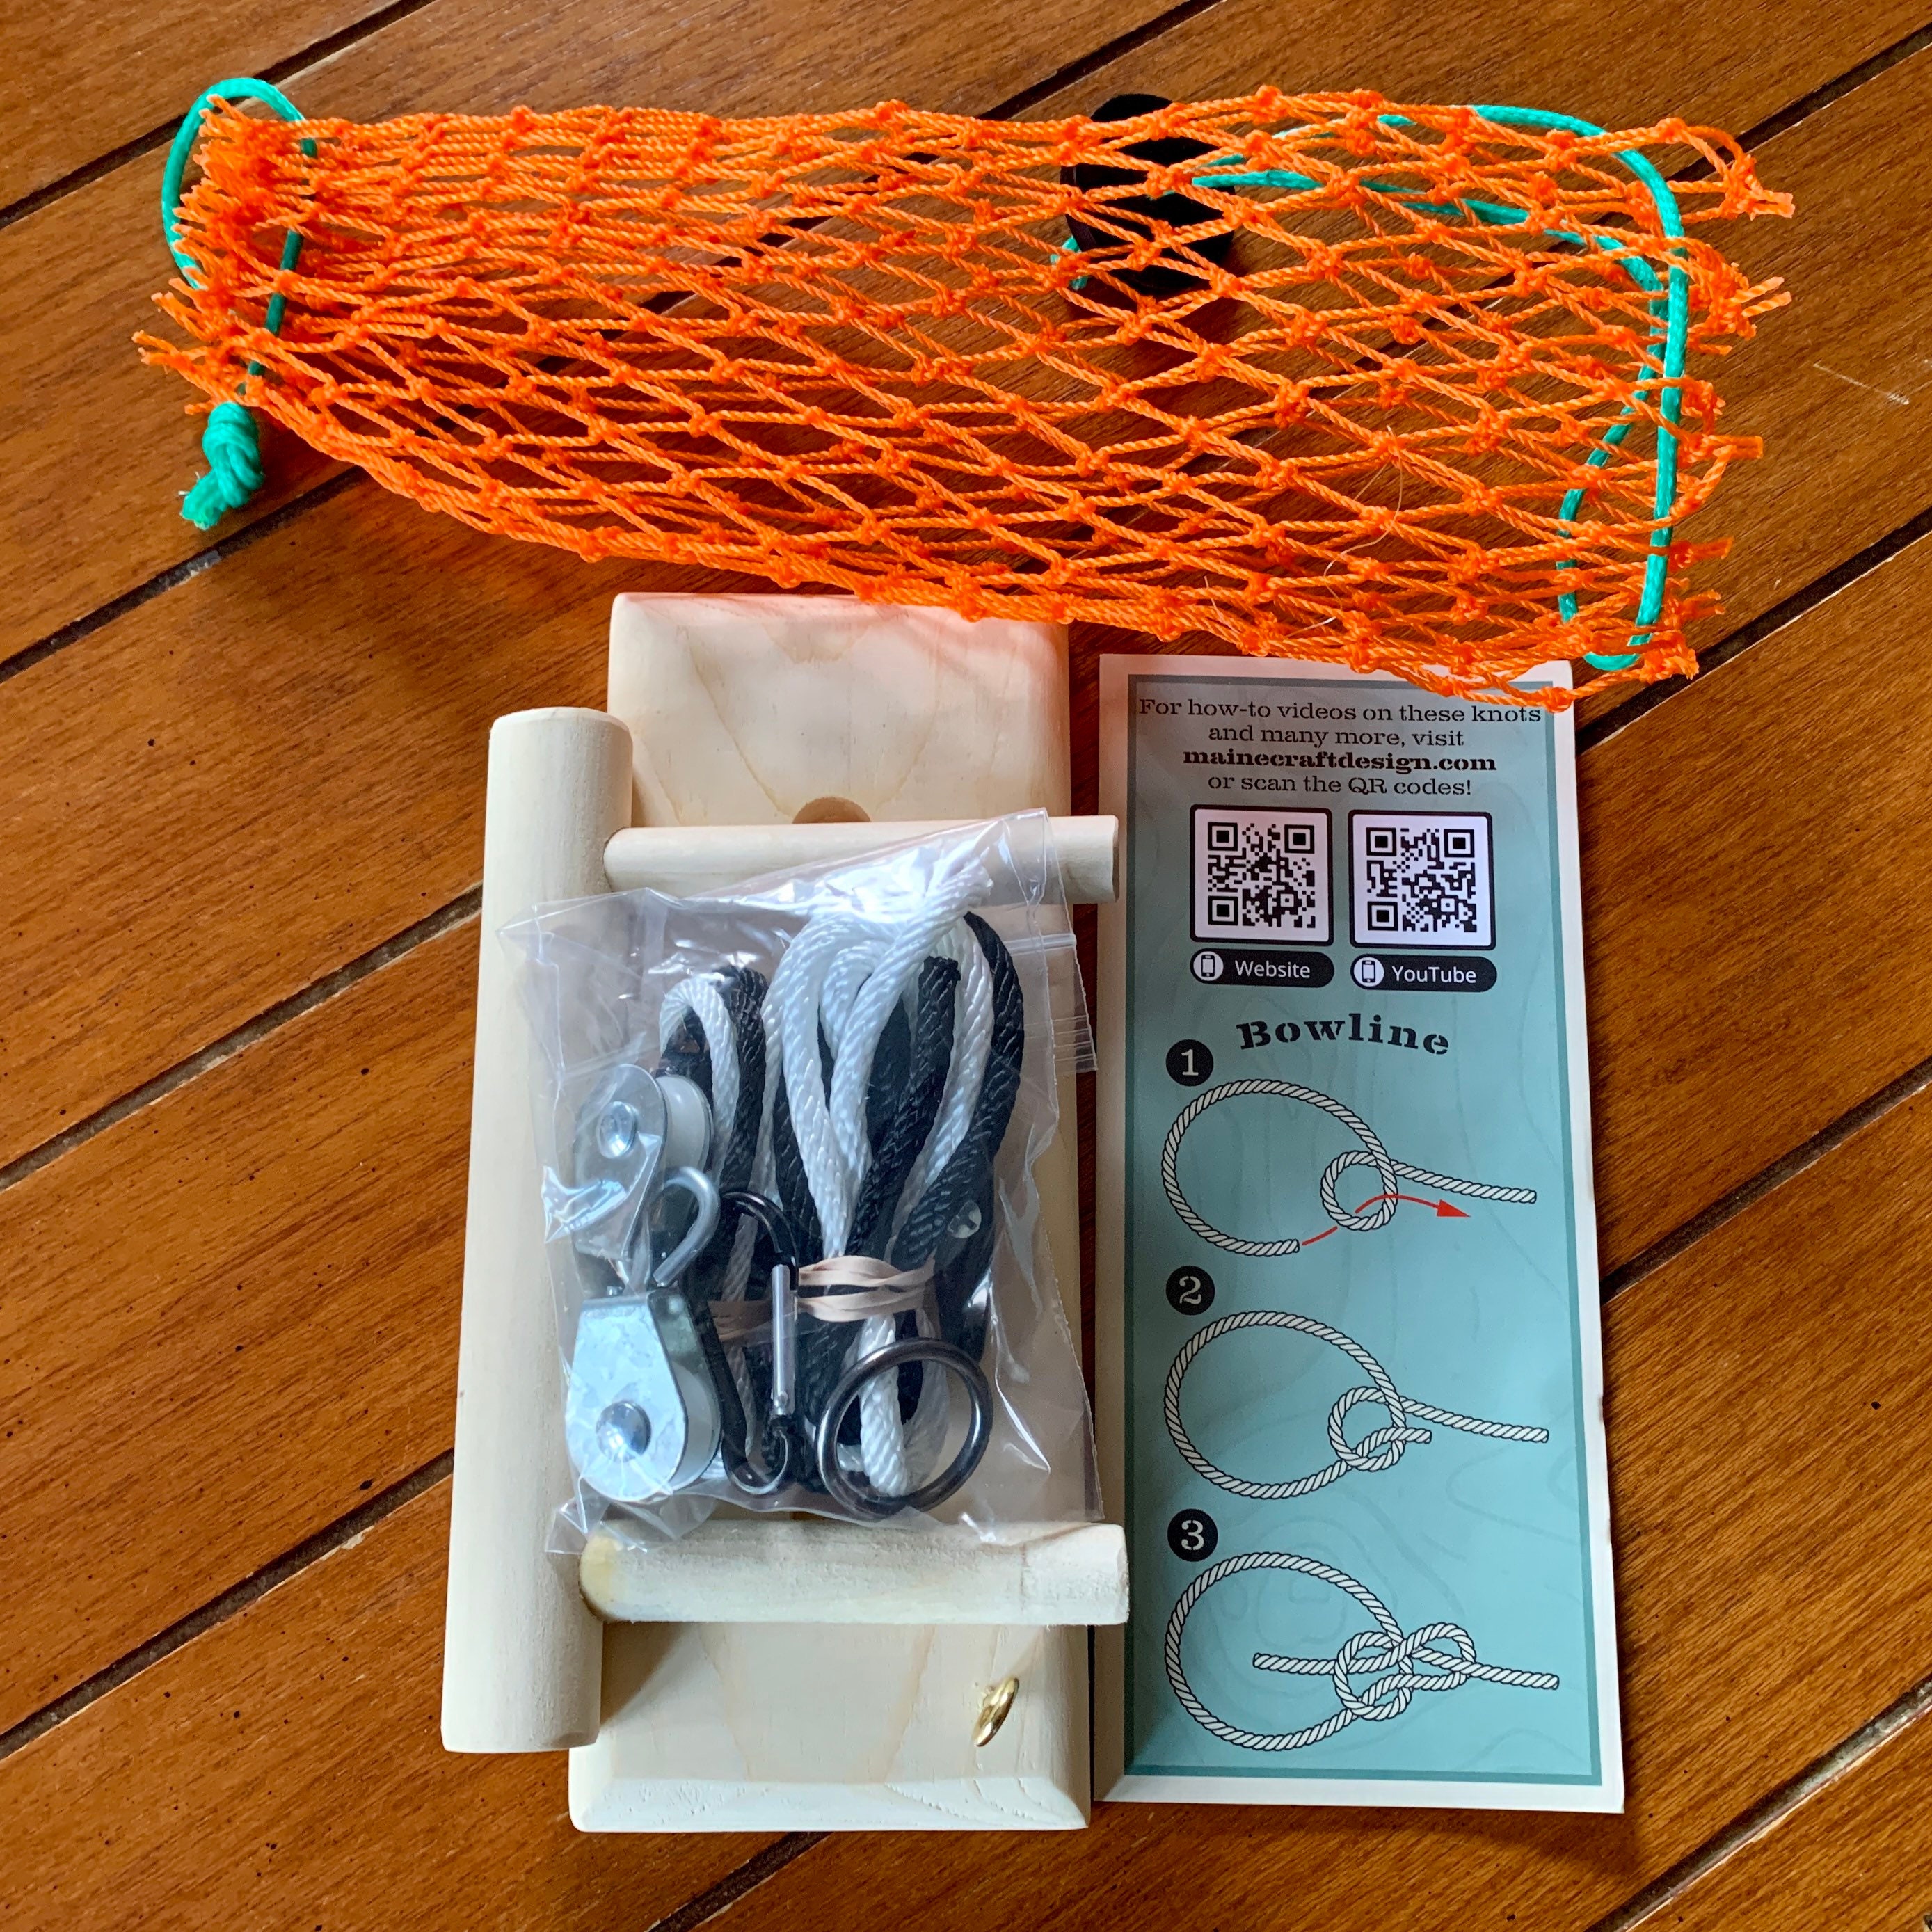 Knot Tying Kit – The Uncharted Studio